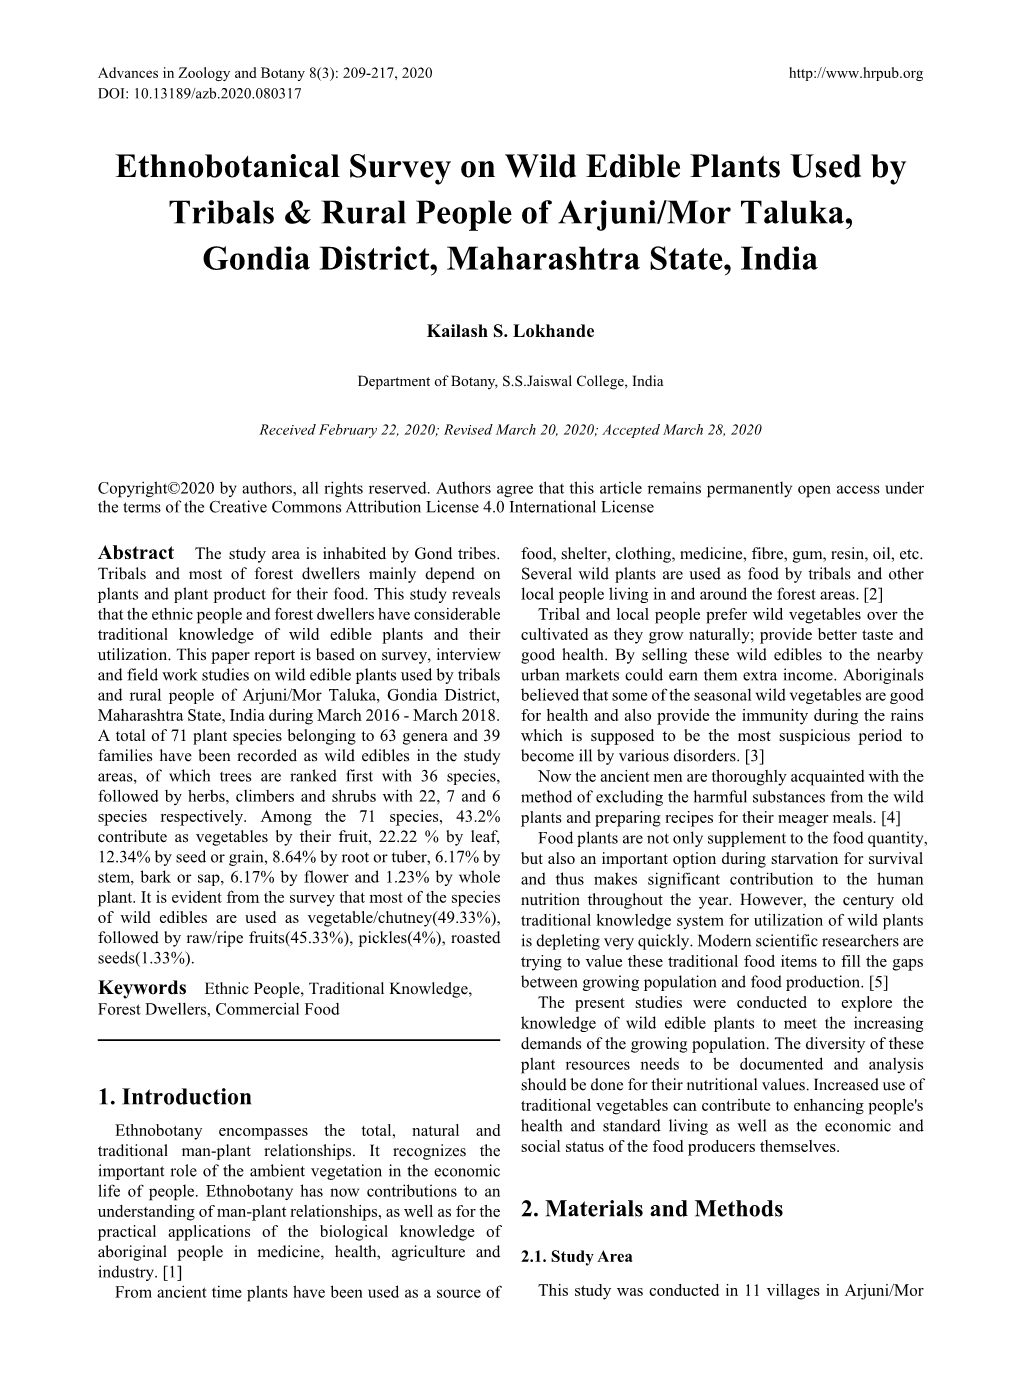 Ethnobotanical Survey on Wild Edible Plants Used by Tribals & Rural